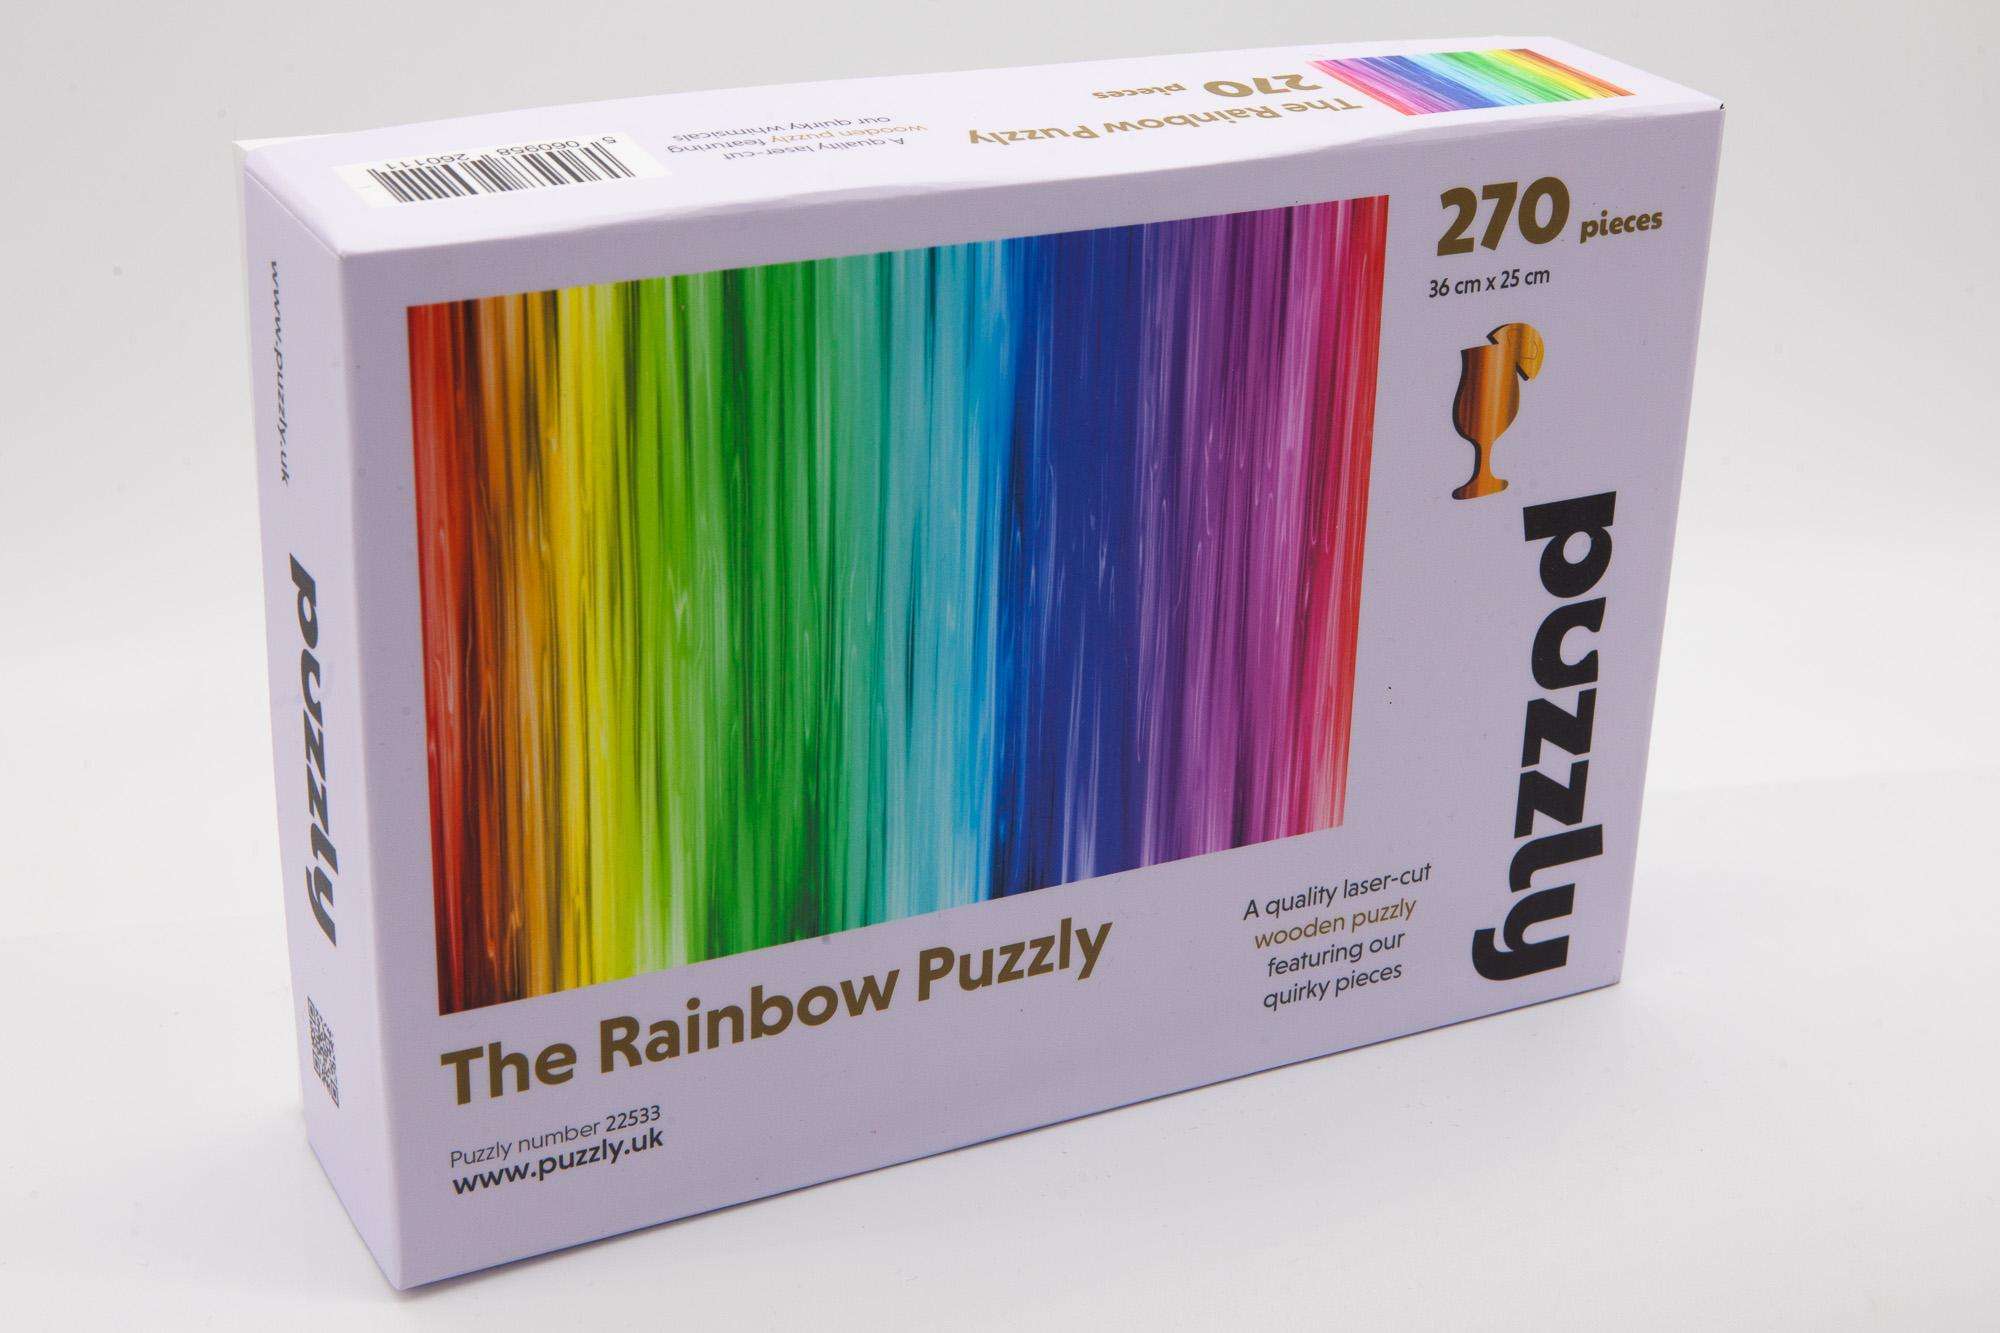 The Rainbow Puzzly adult wooden puzzle